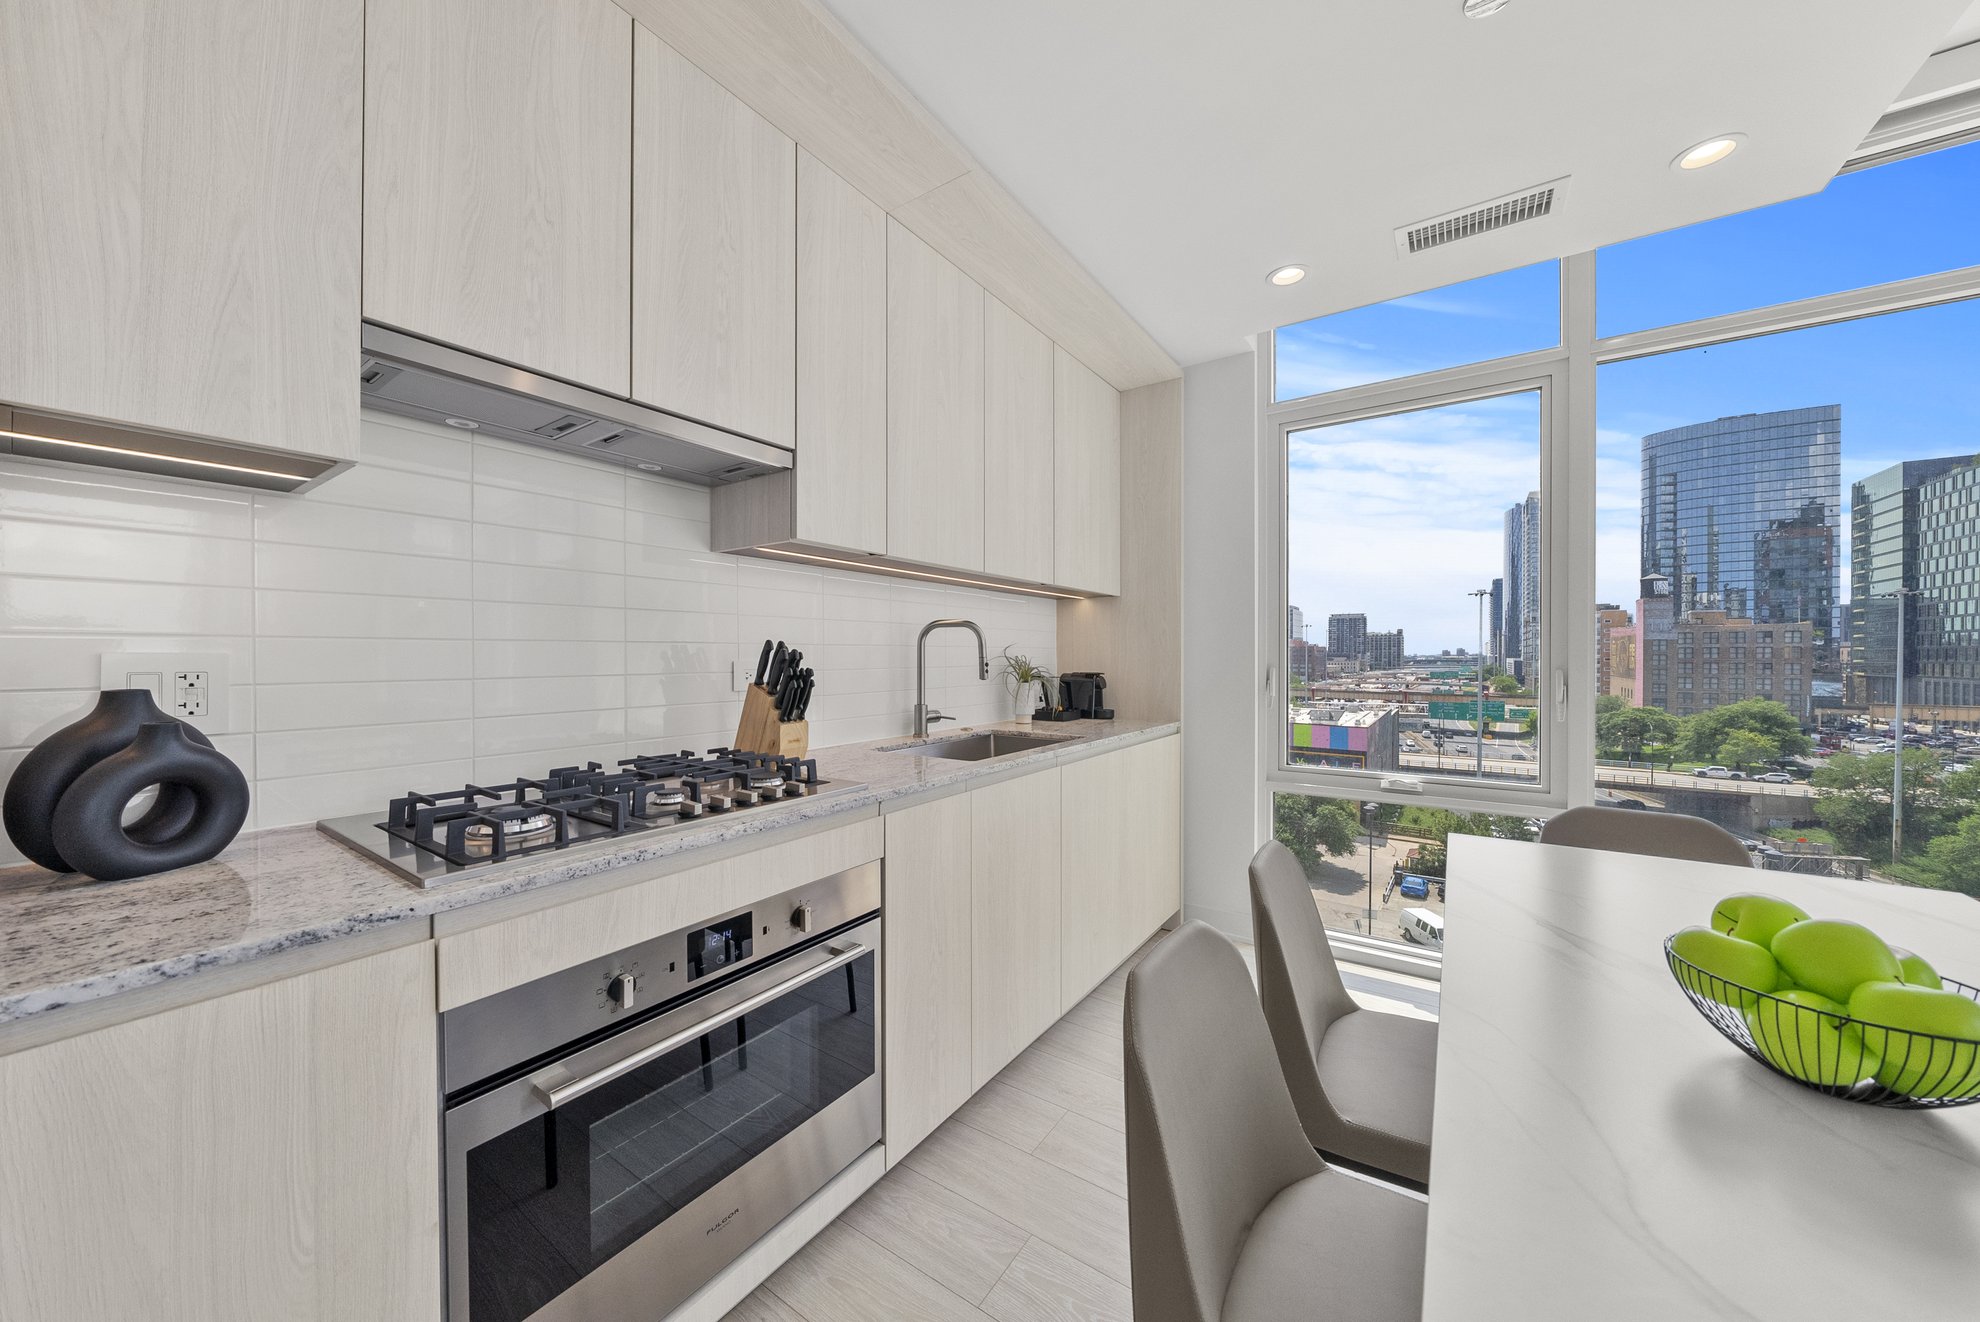 kitchen area at level fulton market looking to beautiful chicago view from three bedroom suite